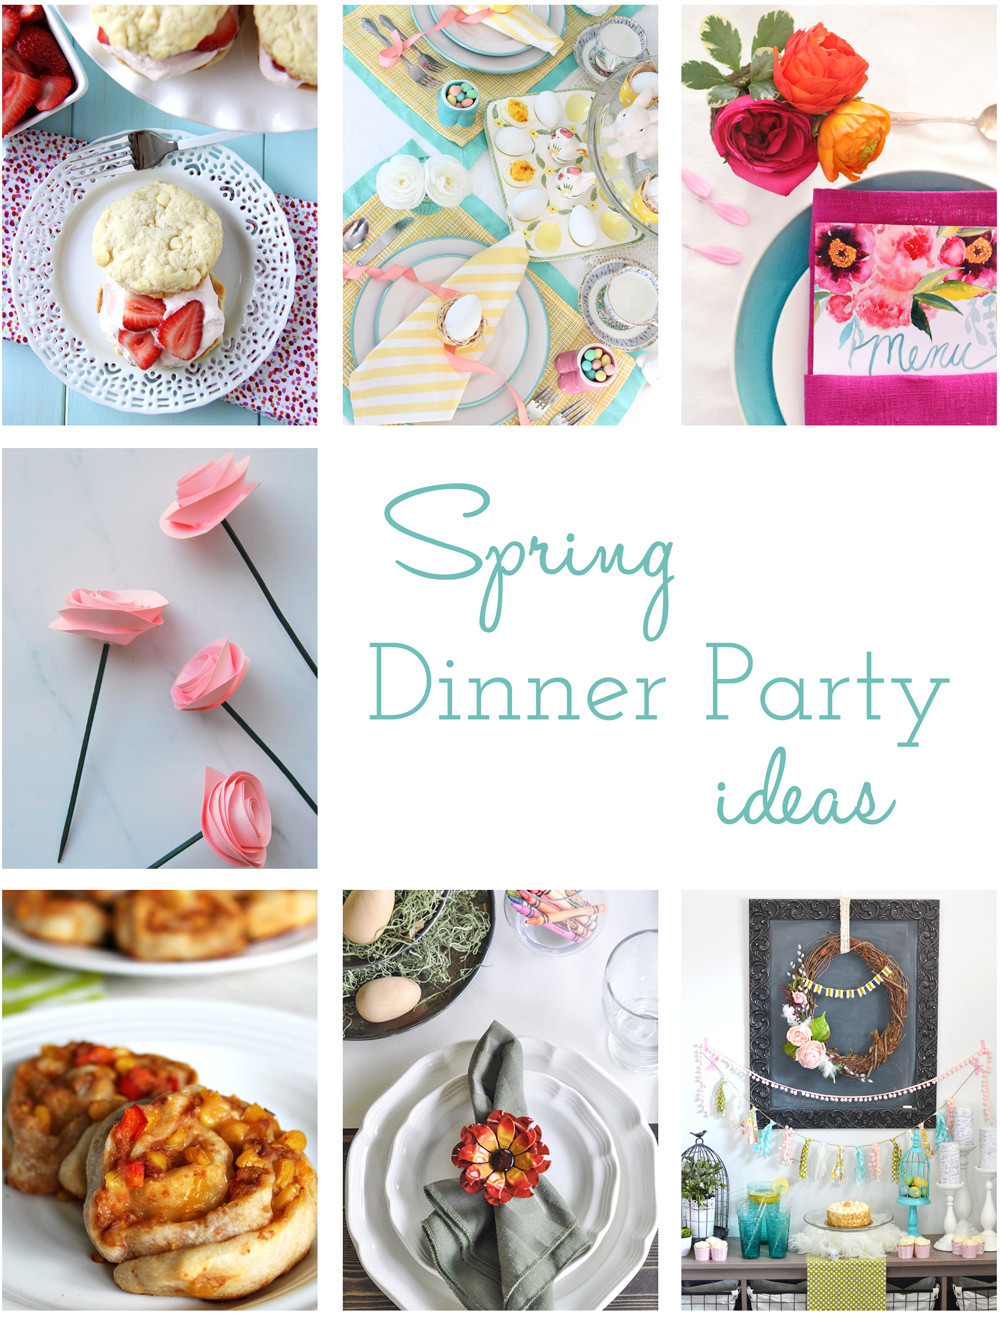 Spring Dinner Ideas
 Setting The Kids Table & 7 Great Spring Dinner Party